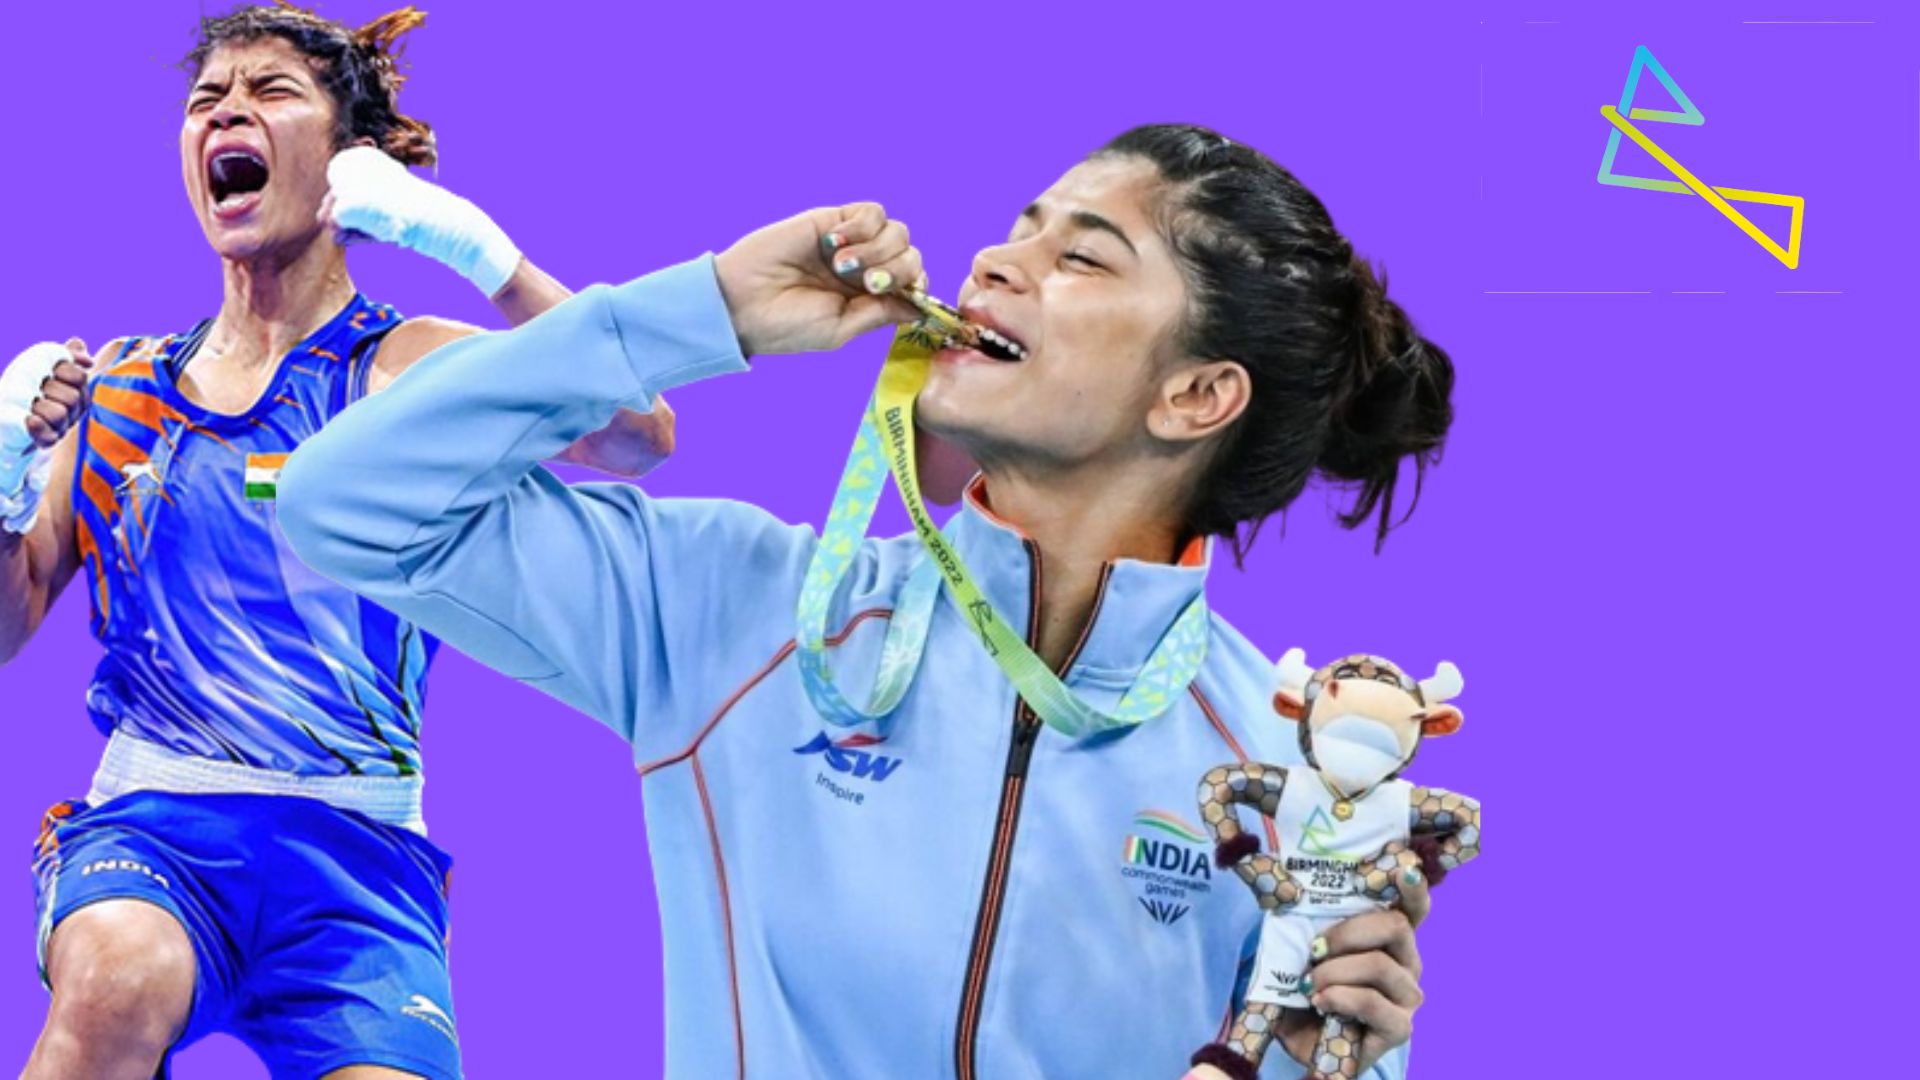 CWG 2022: Nikhat Zareen Brings Home A Gold Medal. We Love How She’s Flaunting Her Tricoloured Nails With Her Win!